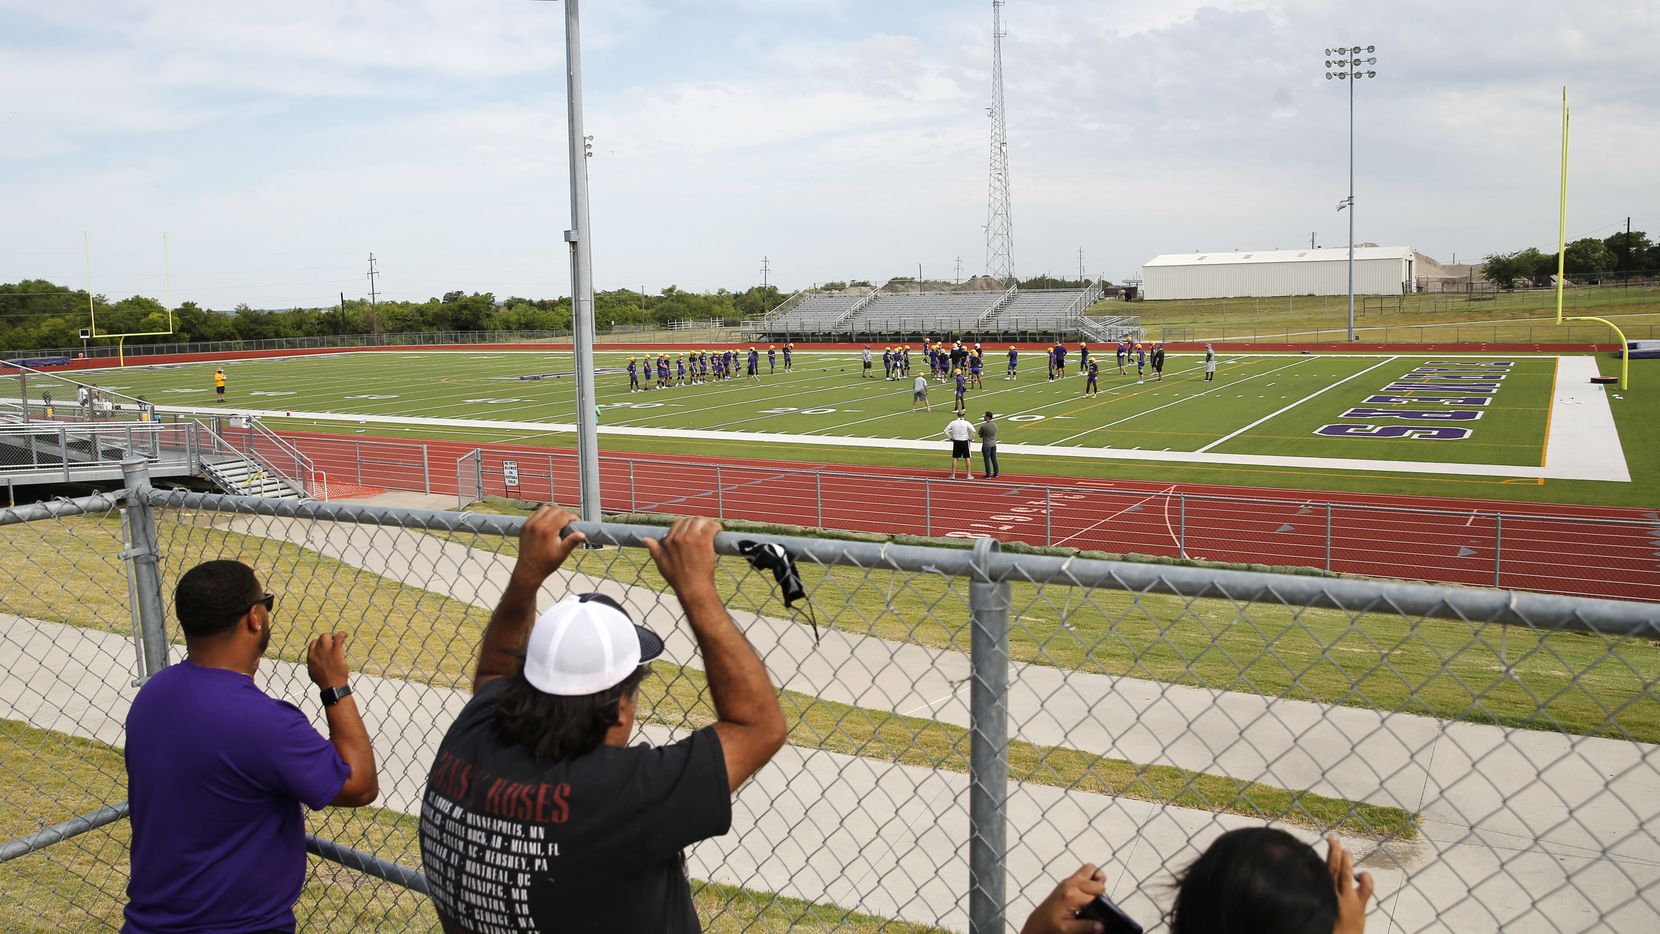 Parents of players Aaron Clark (left), Jose Chairez (center) and Corina Chairez (far right) watch practice from the gate during the first day of high school football practice for 4A's Farmersville High School in Farmersville, Texas on Monday, August 3, 2020. (Vernon Bryant/The Dallas Morning News)